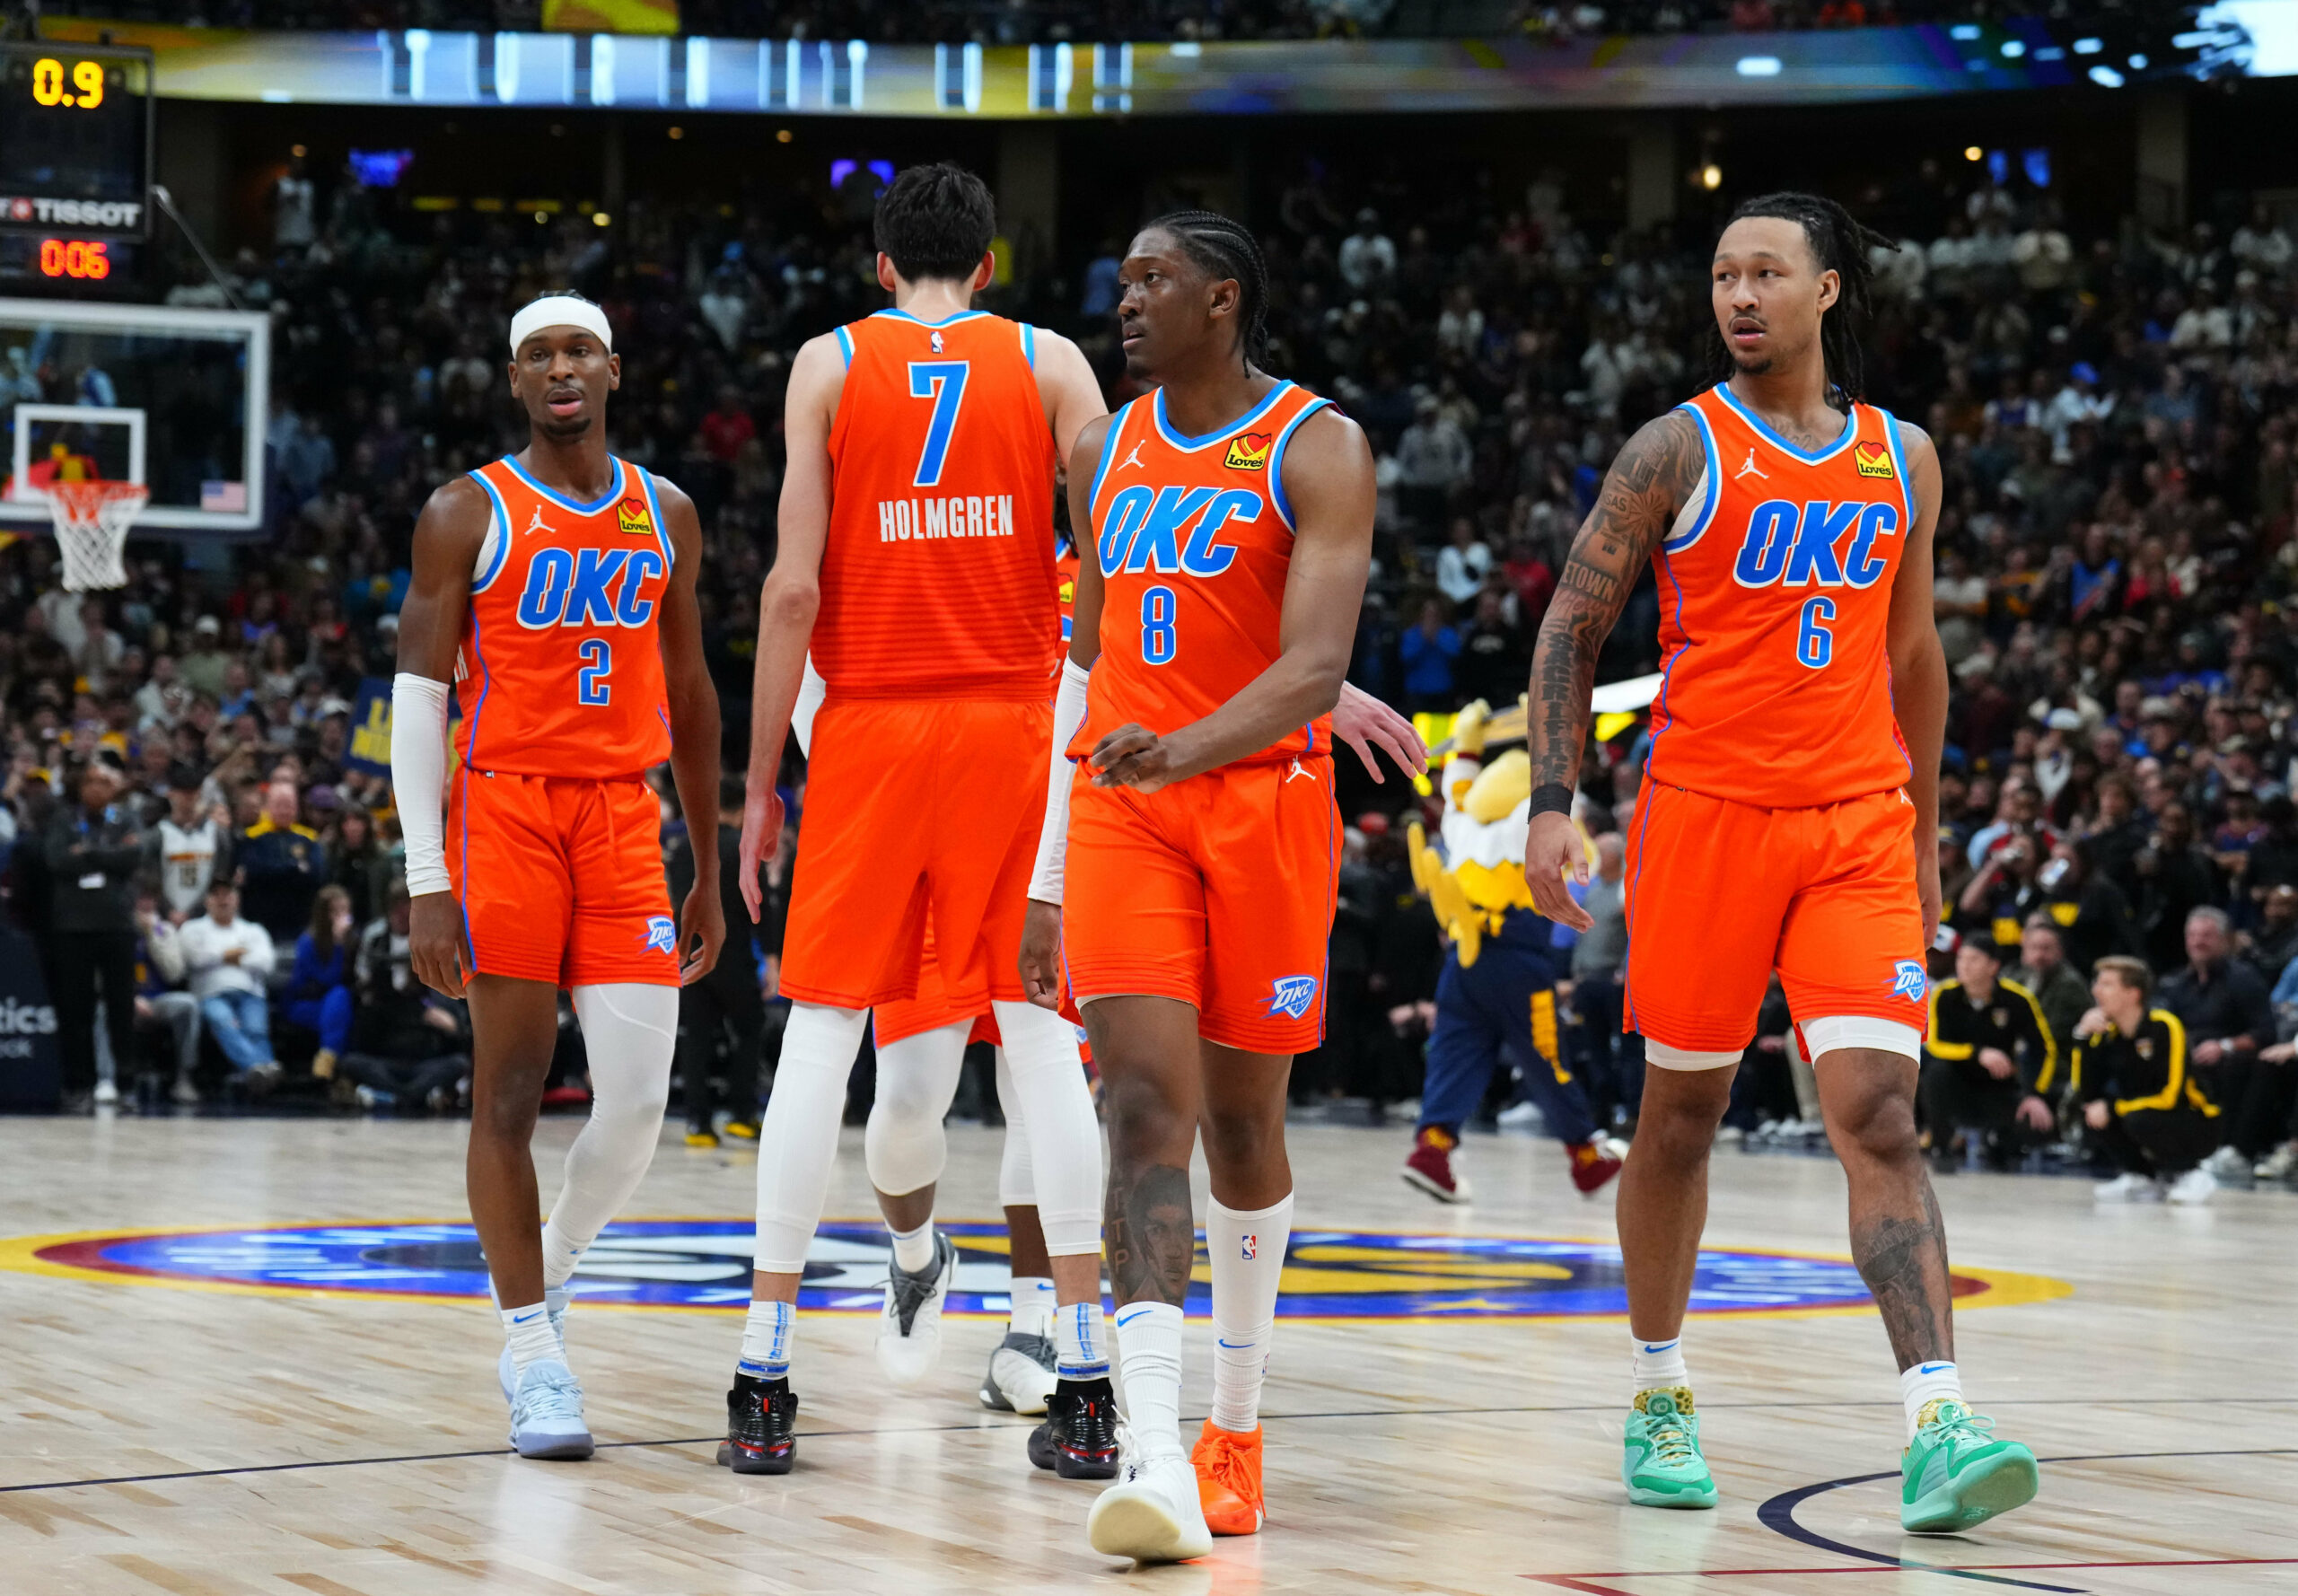 Woj: OKC Thunder to play season out with current group ahead of trade deadline